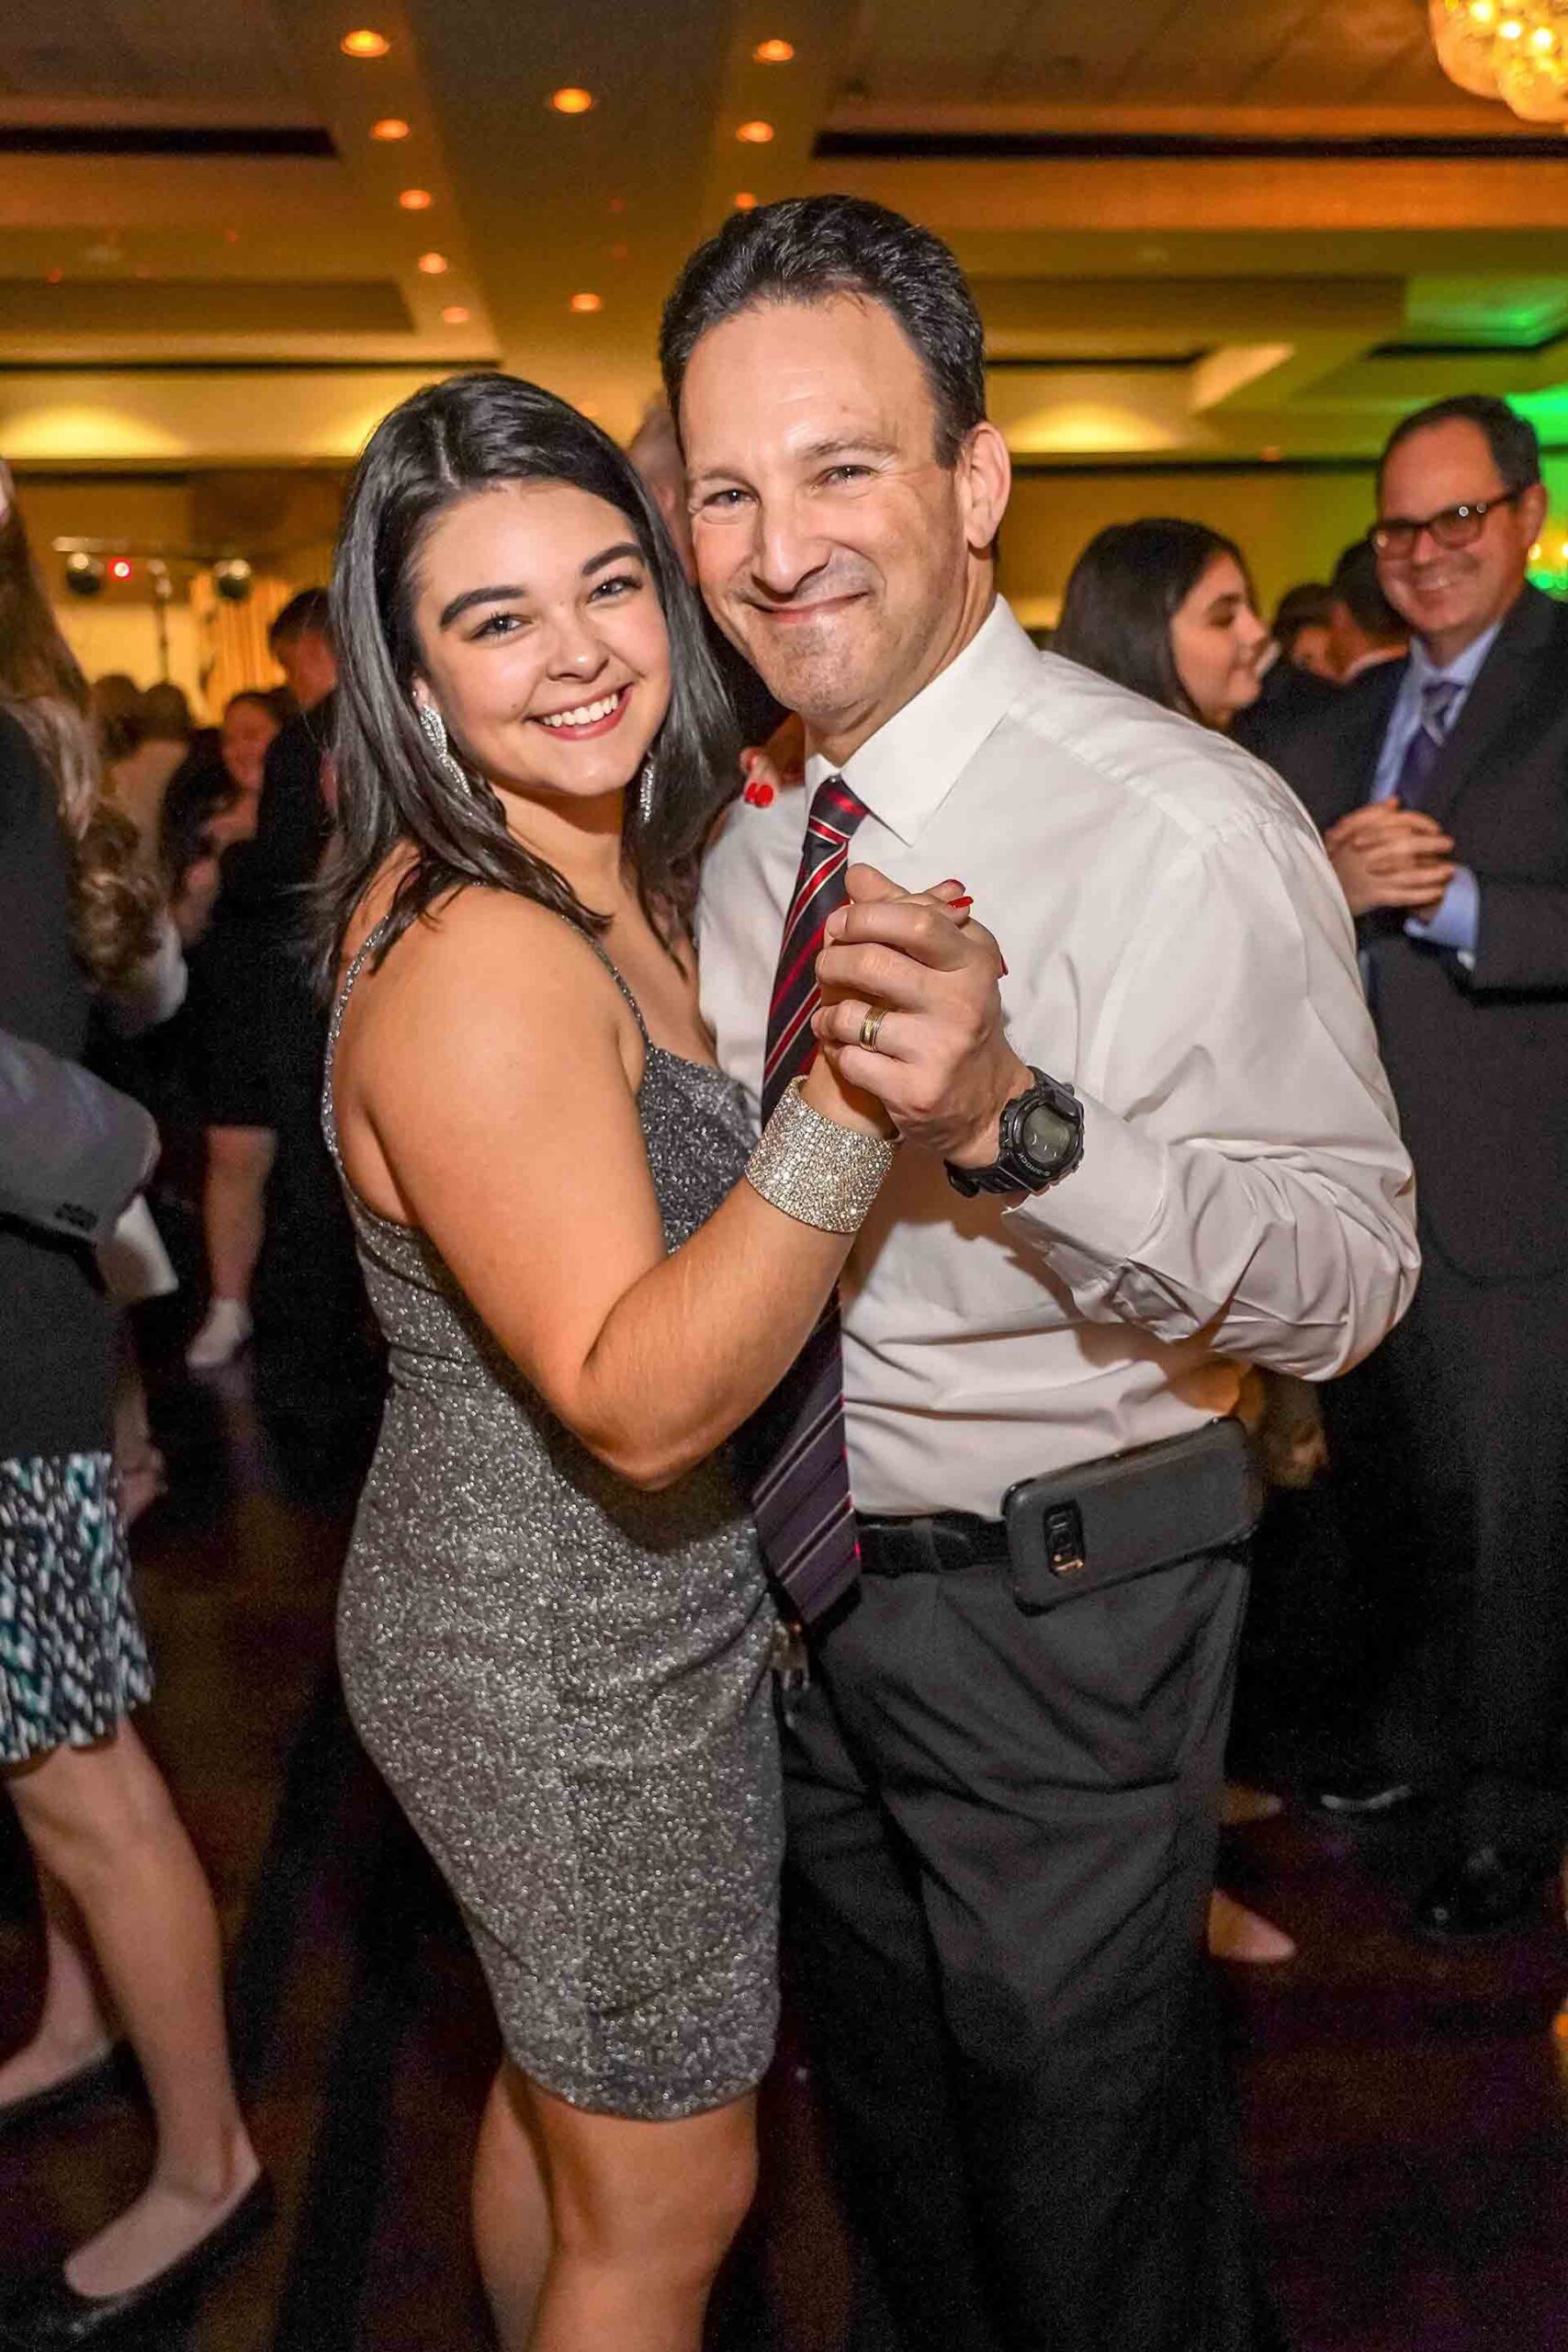 father-daughter-dance-2019-girl-with-sparkly-dress-dancing-with-father